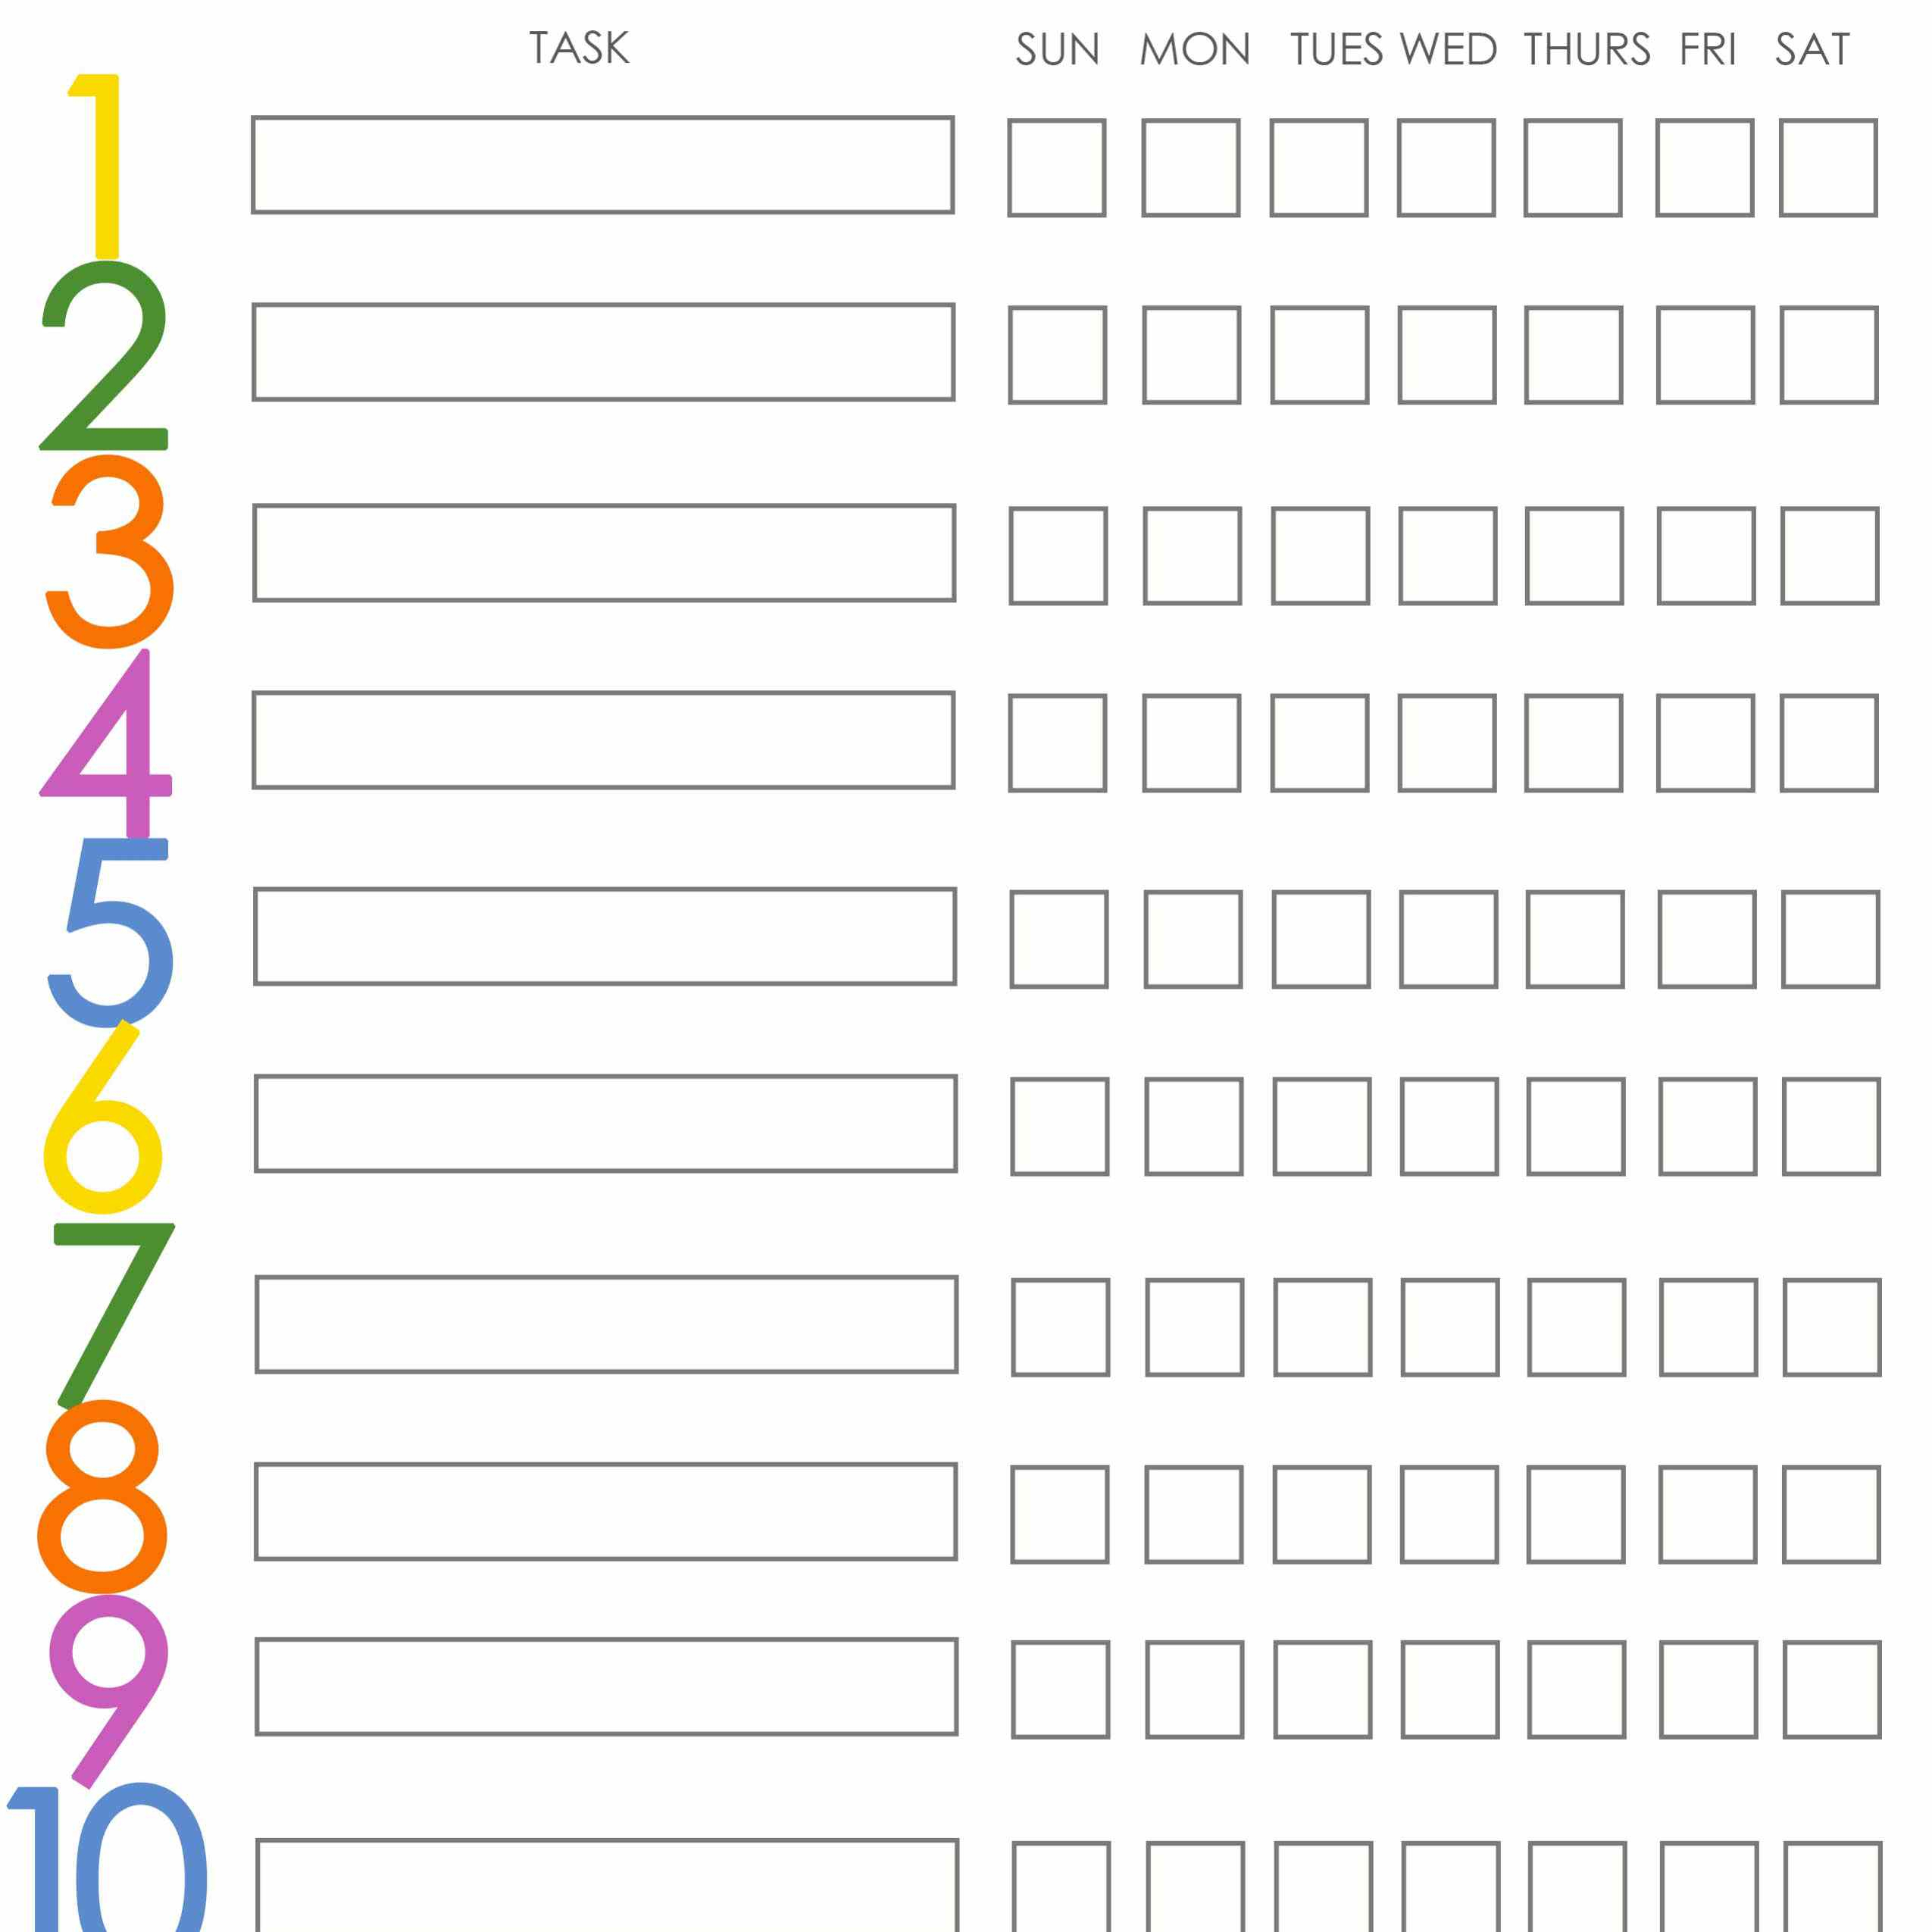 Free Printable Weekly Chore Charts - Free Printable Chore List For Teenager